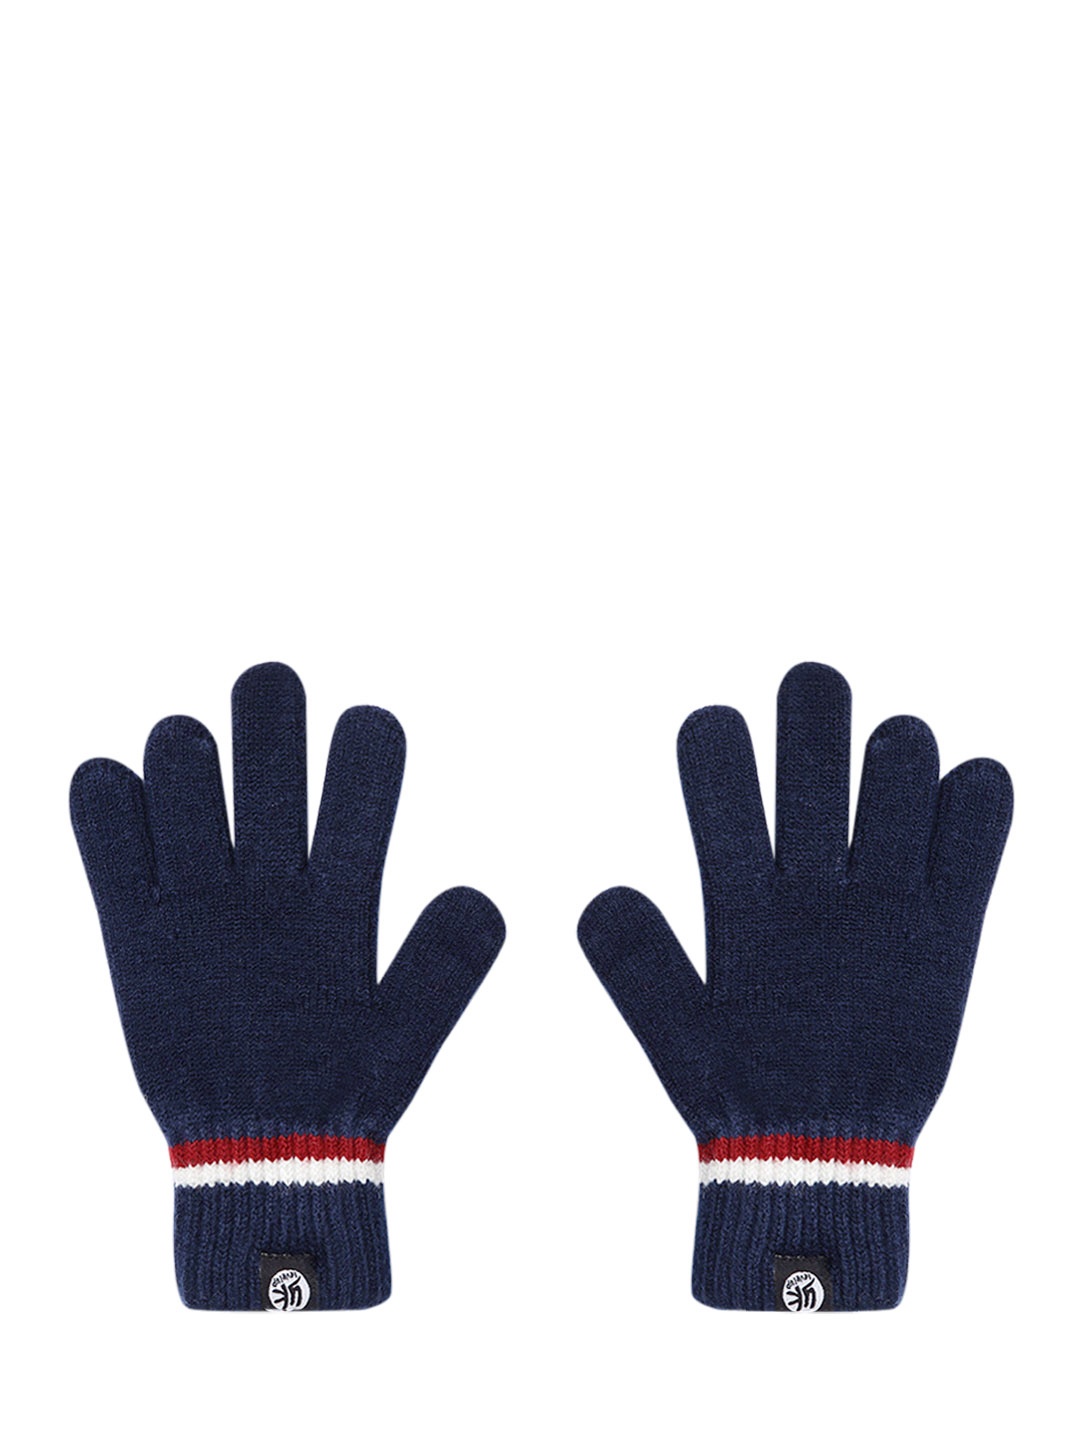 

YK Kids Navy Solid Hand Gloves with Striped Detail, Navy blue